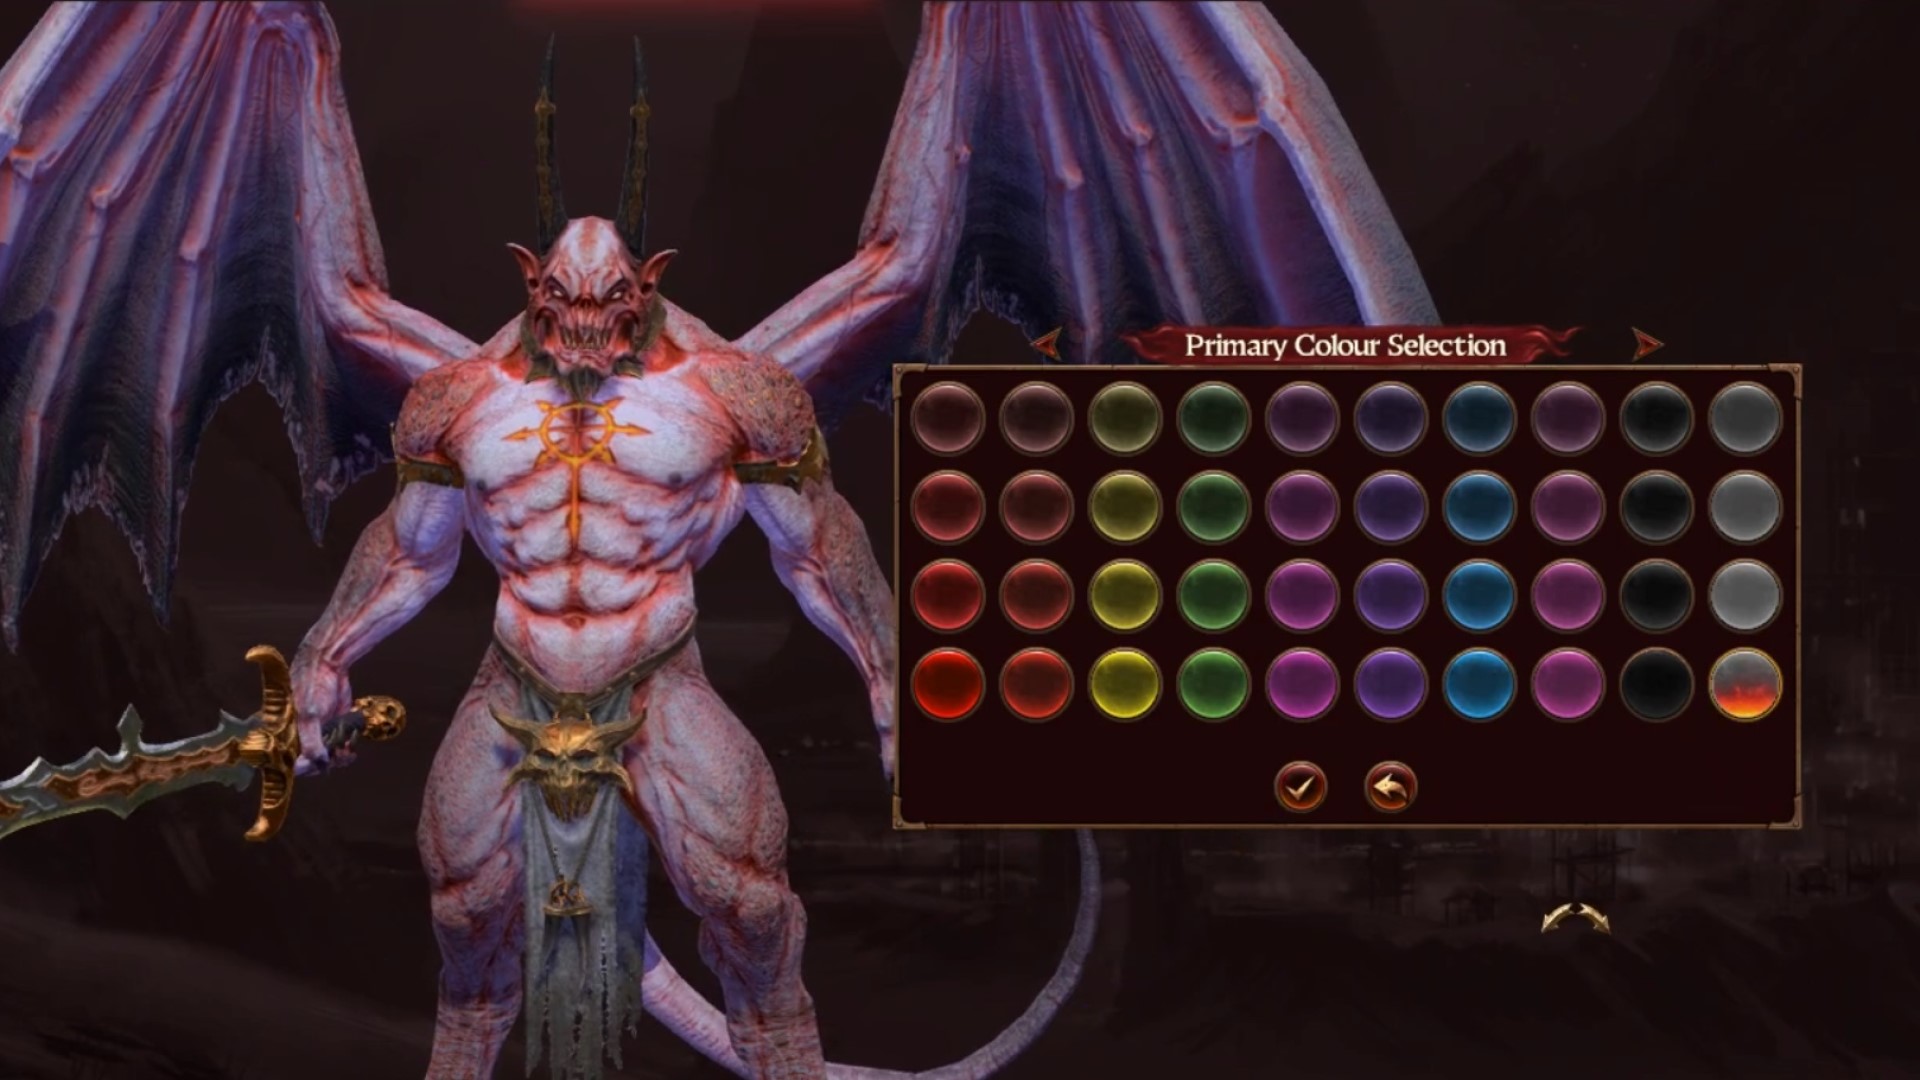 This Total Warhammer 3 mod lets you paint Daniel any colour